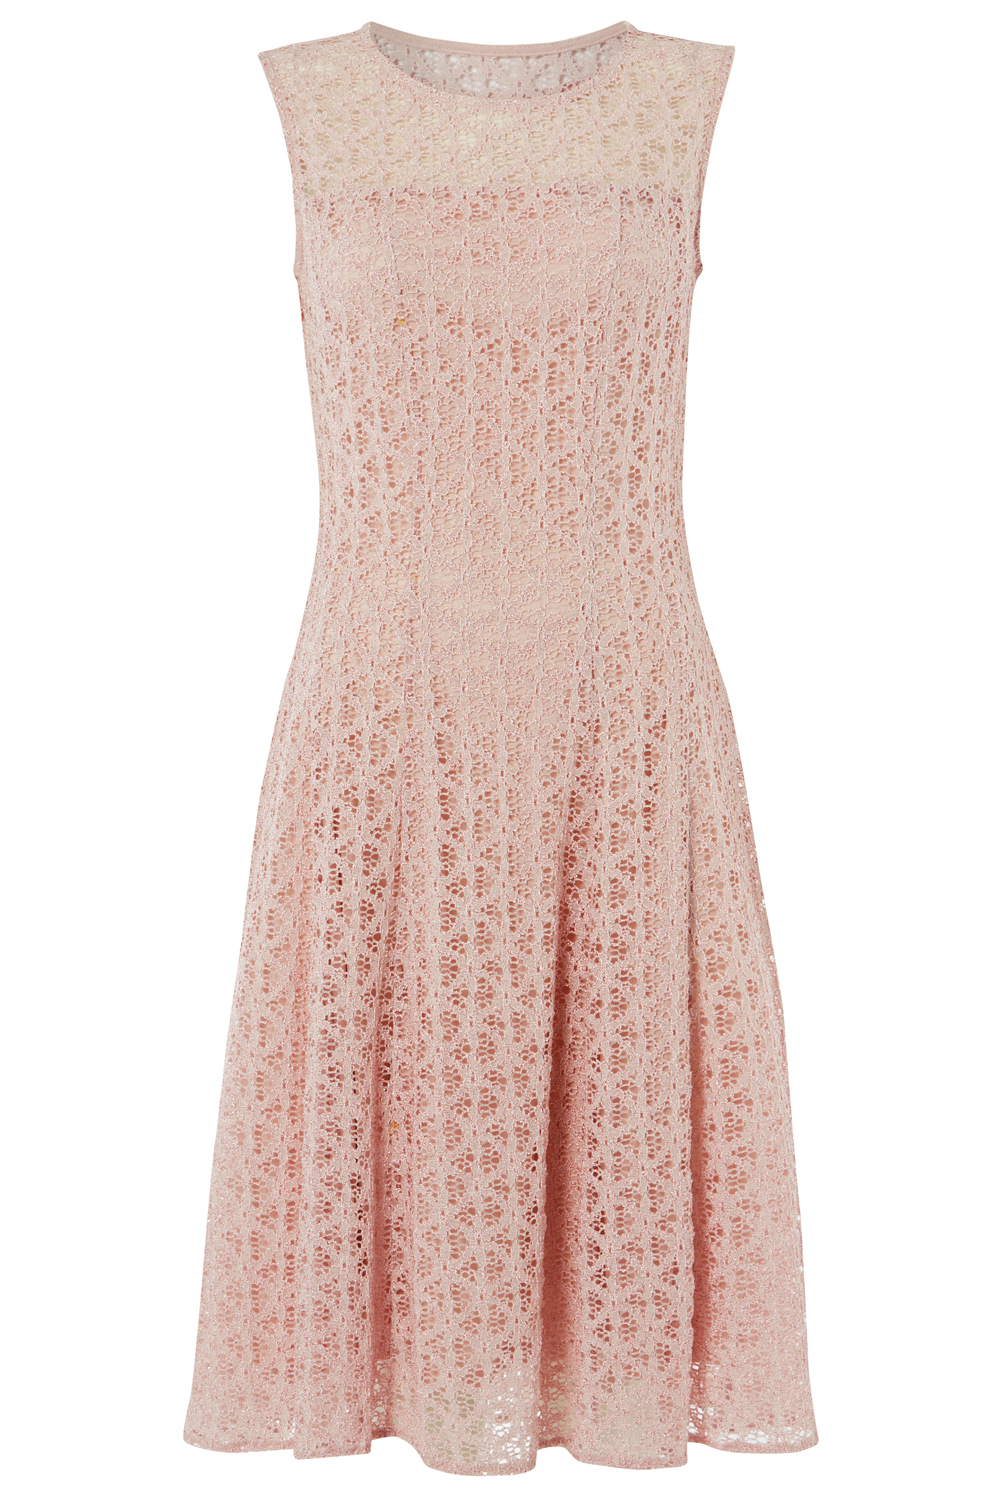 Lace Fit and Flare Dress in Light Pink - Roman Originals UK